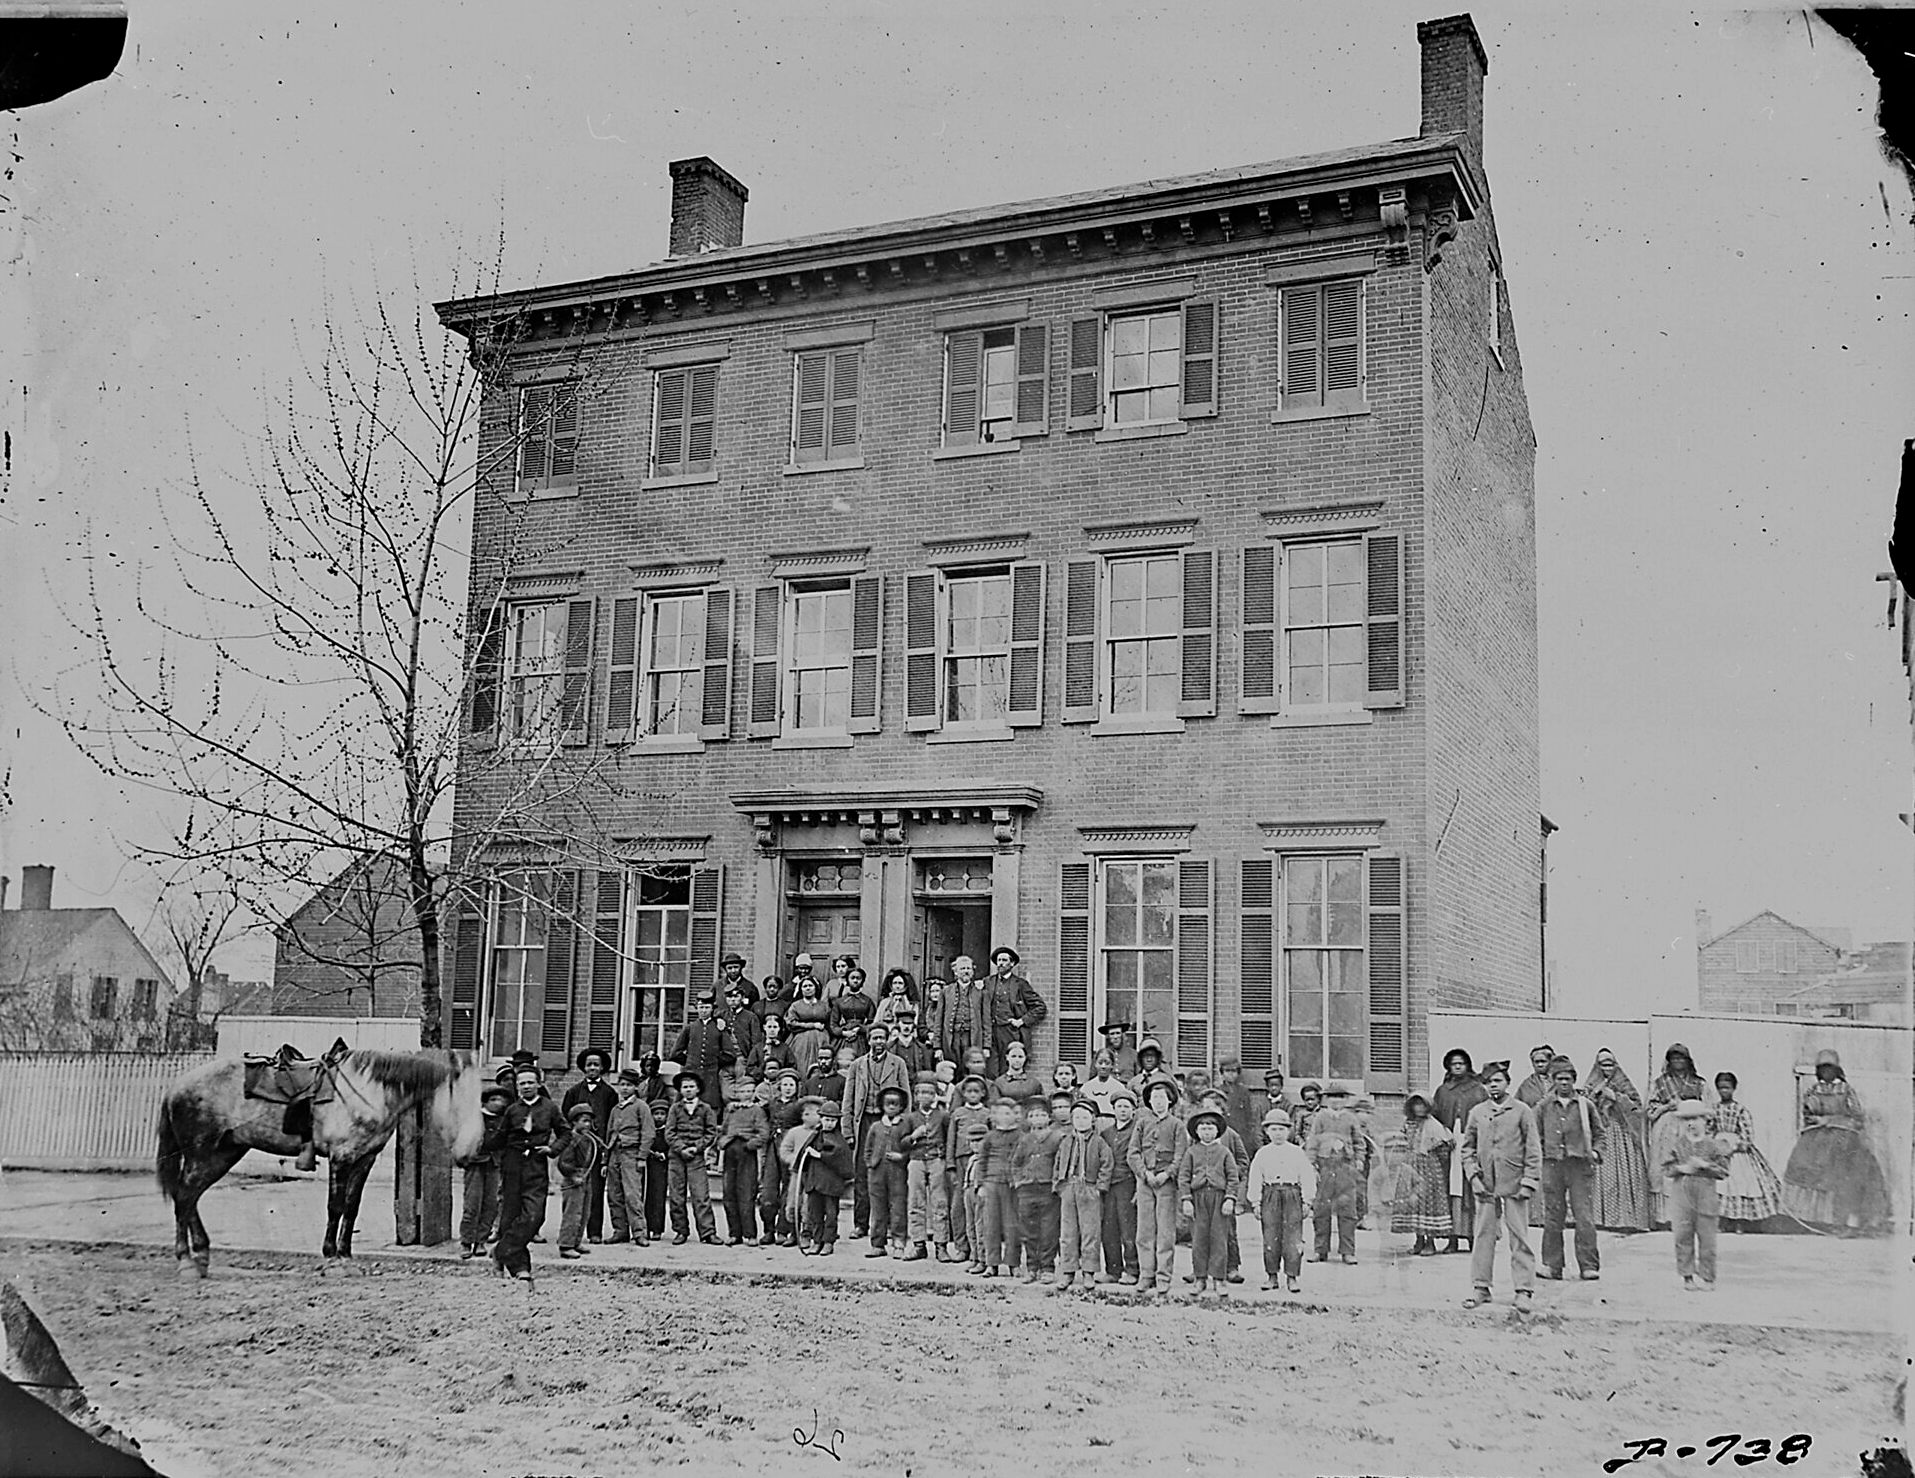 Contraband hospital. Source: Library of Congress.